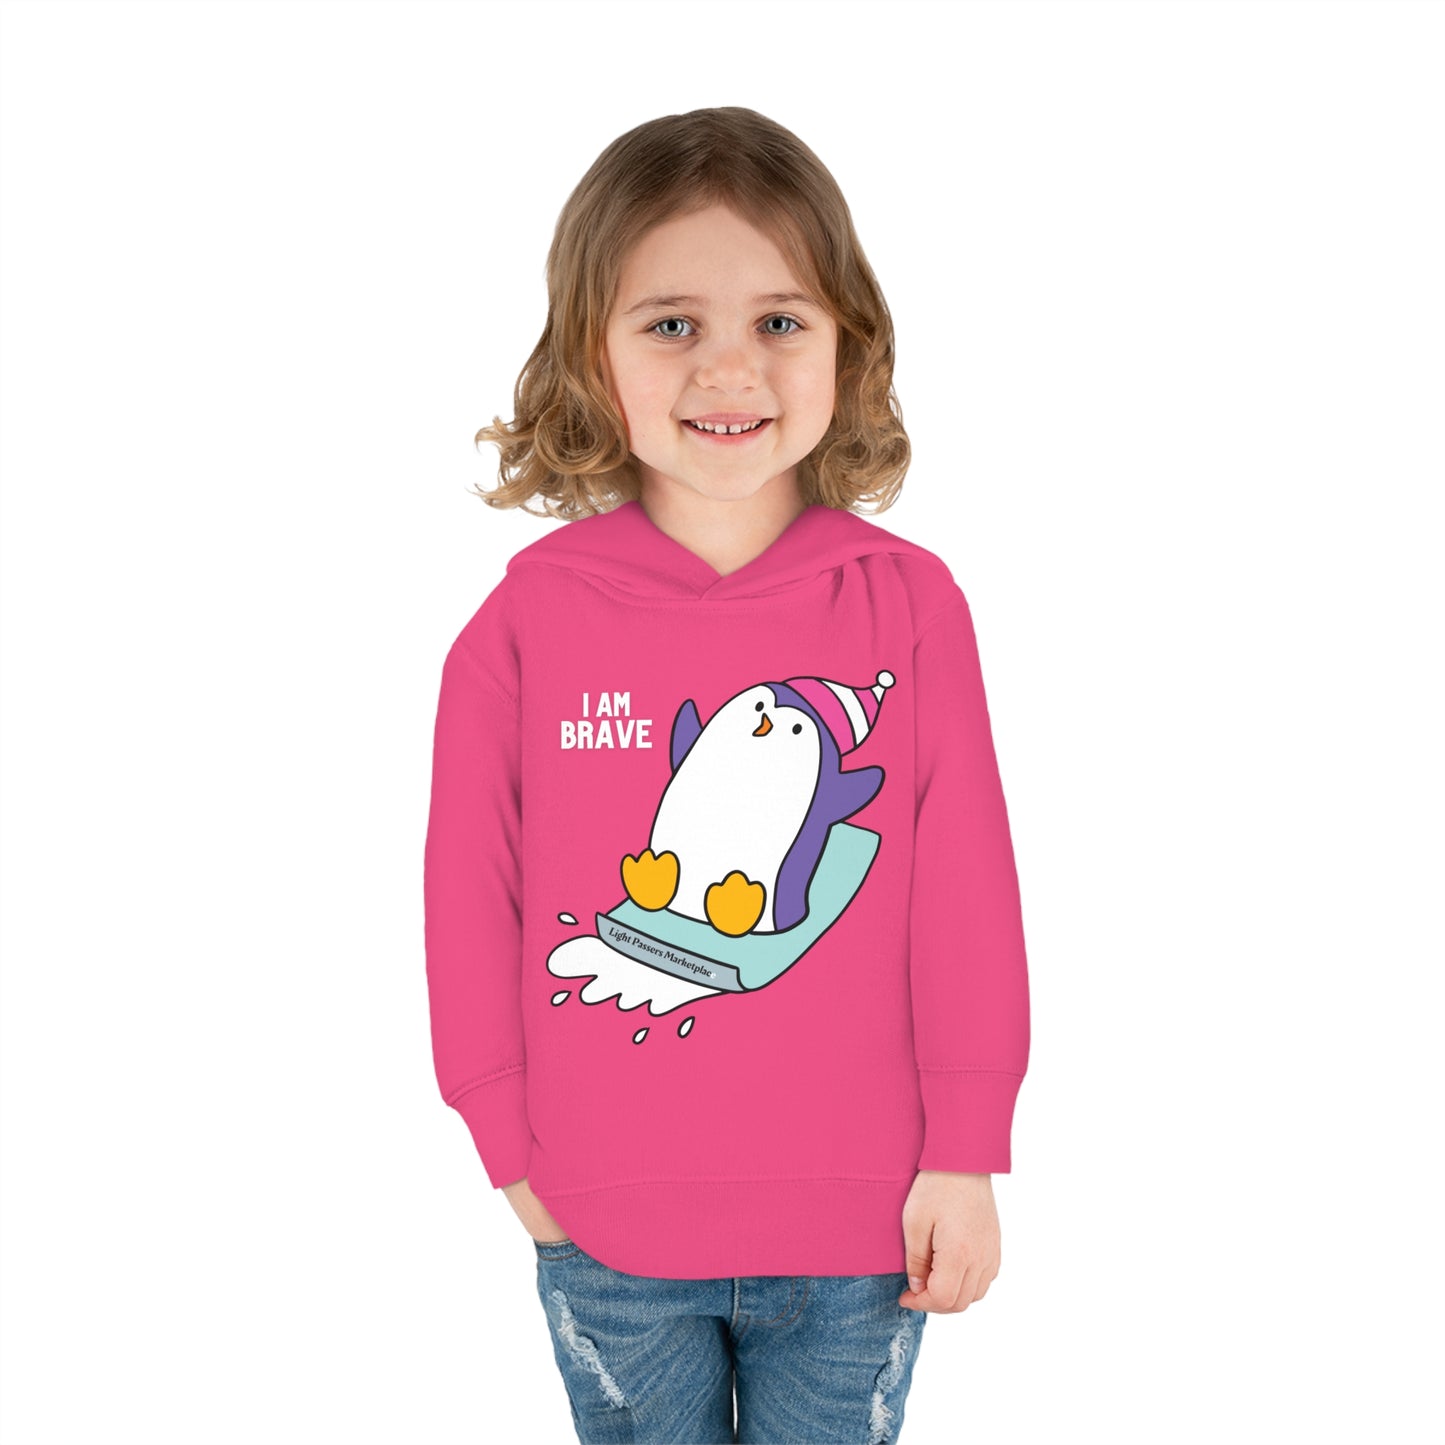 Toddler hoodie featuring a Brave Penguin design. Jersey-lined hood, cover-stitched details, side seam pockets for coziness. 60% cotton, 40% polyester blend for durability and comfort.